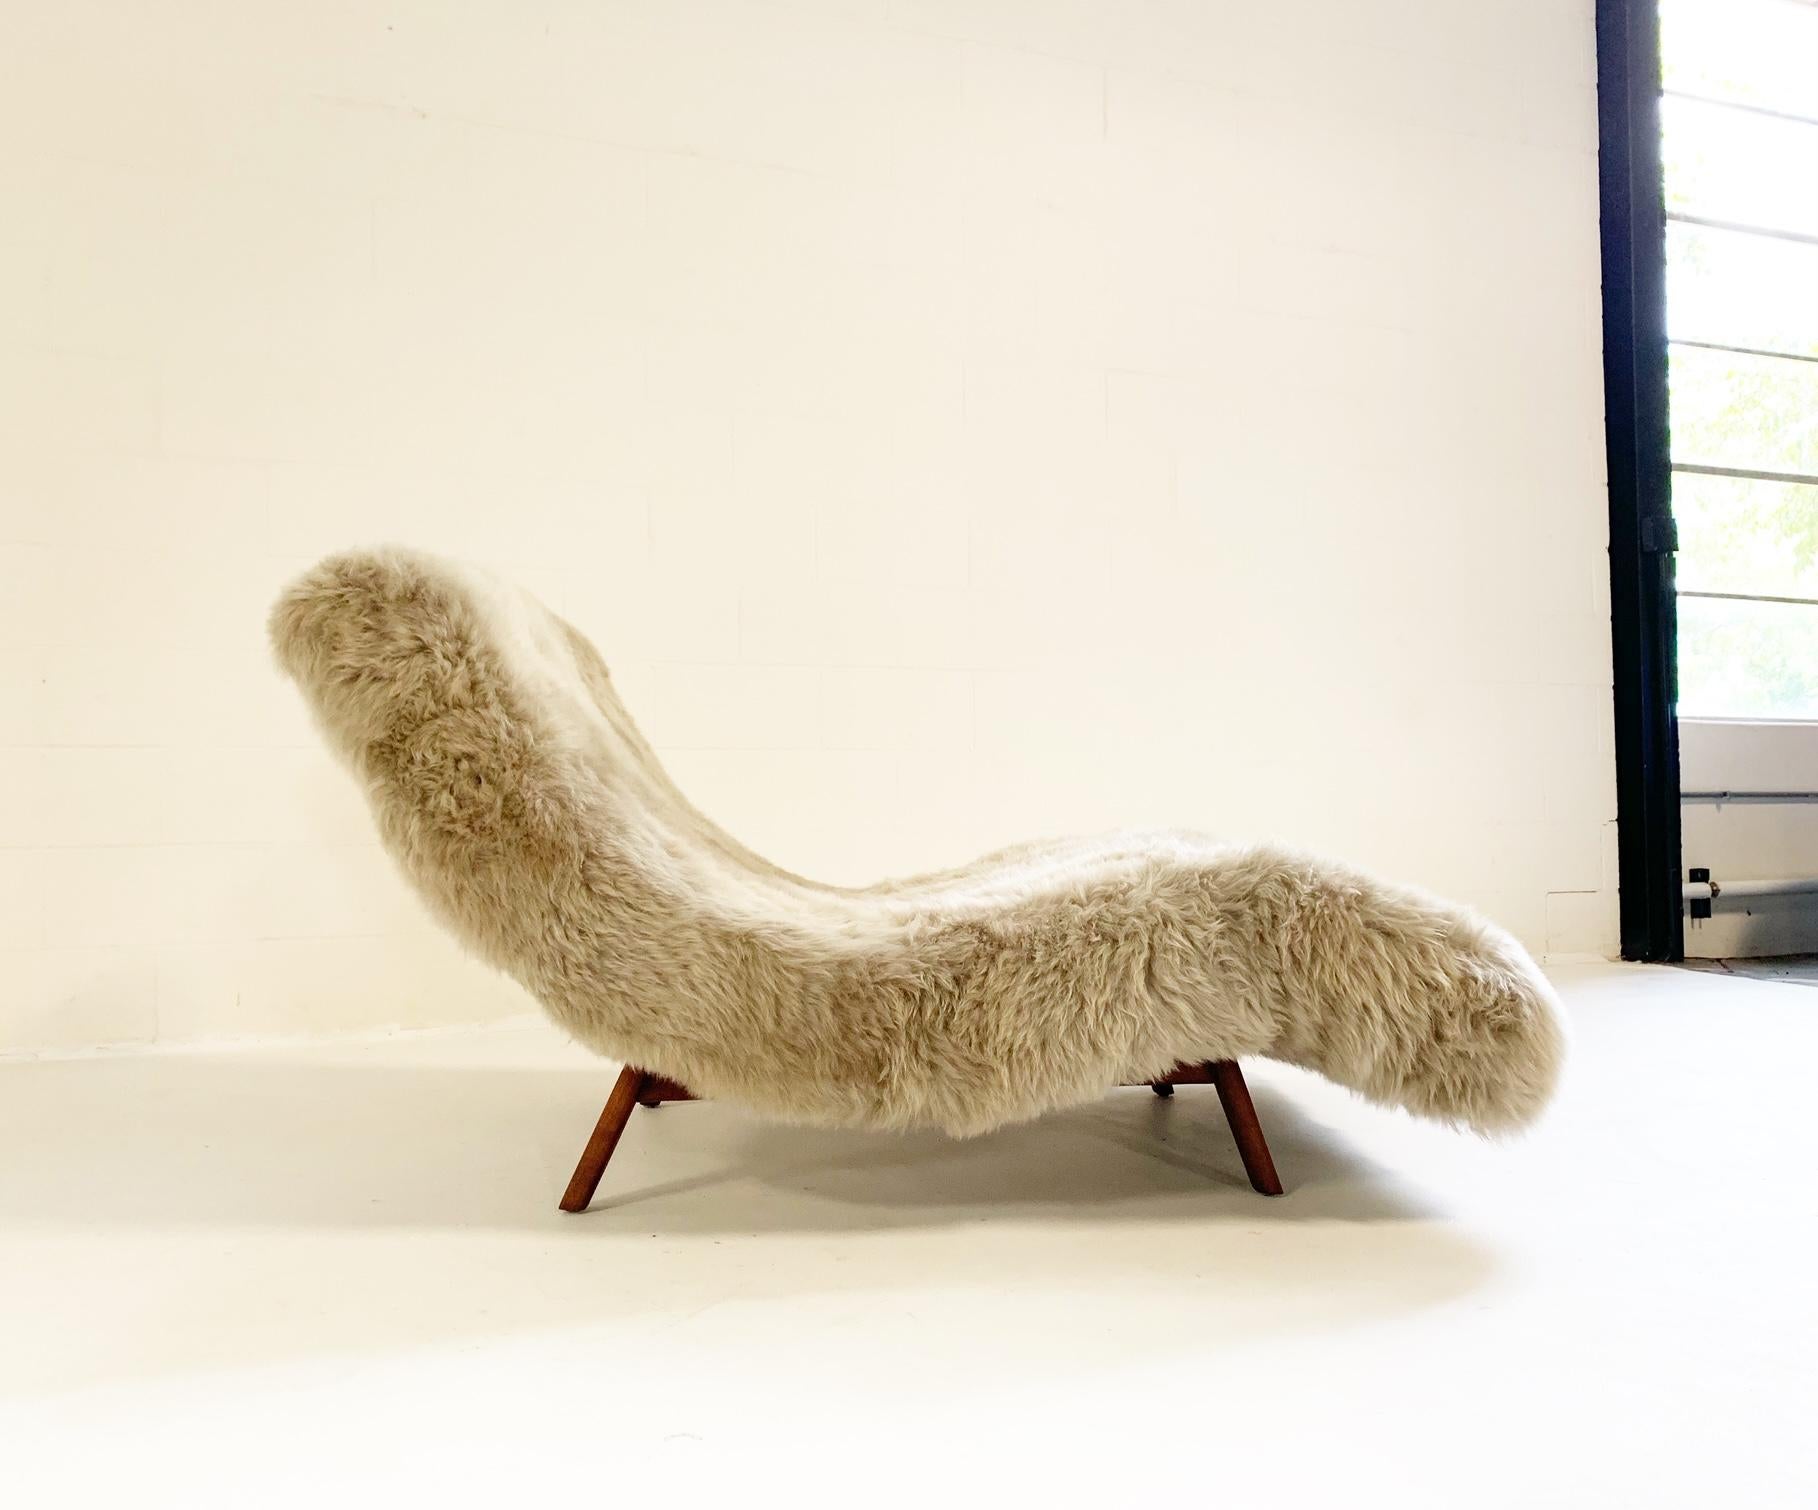 A stunning Adrian Pearsall style wave chaise lounge. We upholstered this chaise lounge in our thick and super soft New Zealand sheepskin after our master upholstery team completely restored the interior foam and cushioning. We love how the cozy,